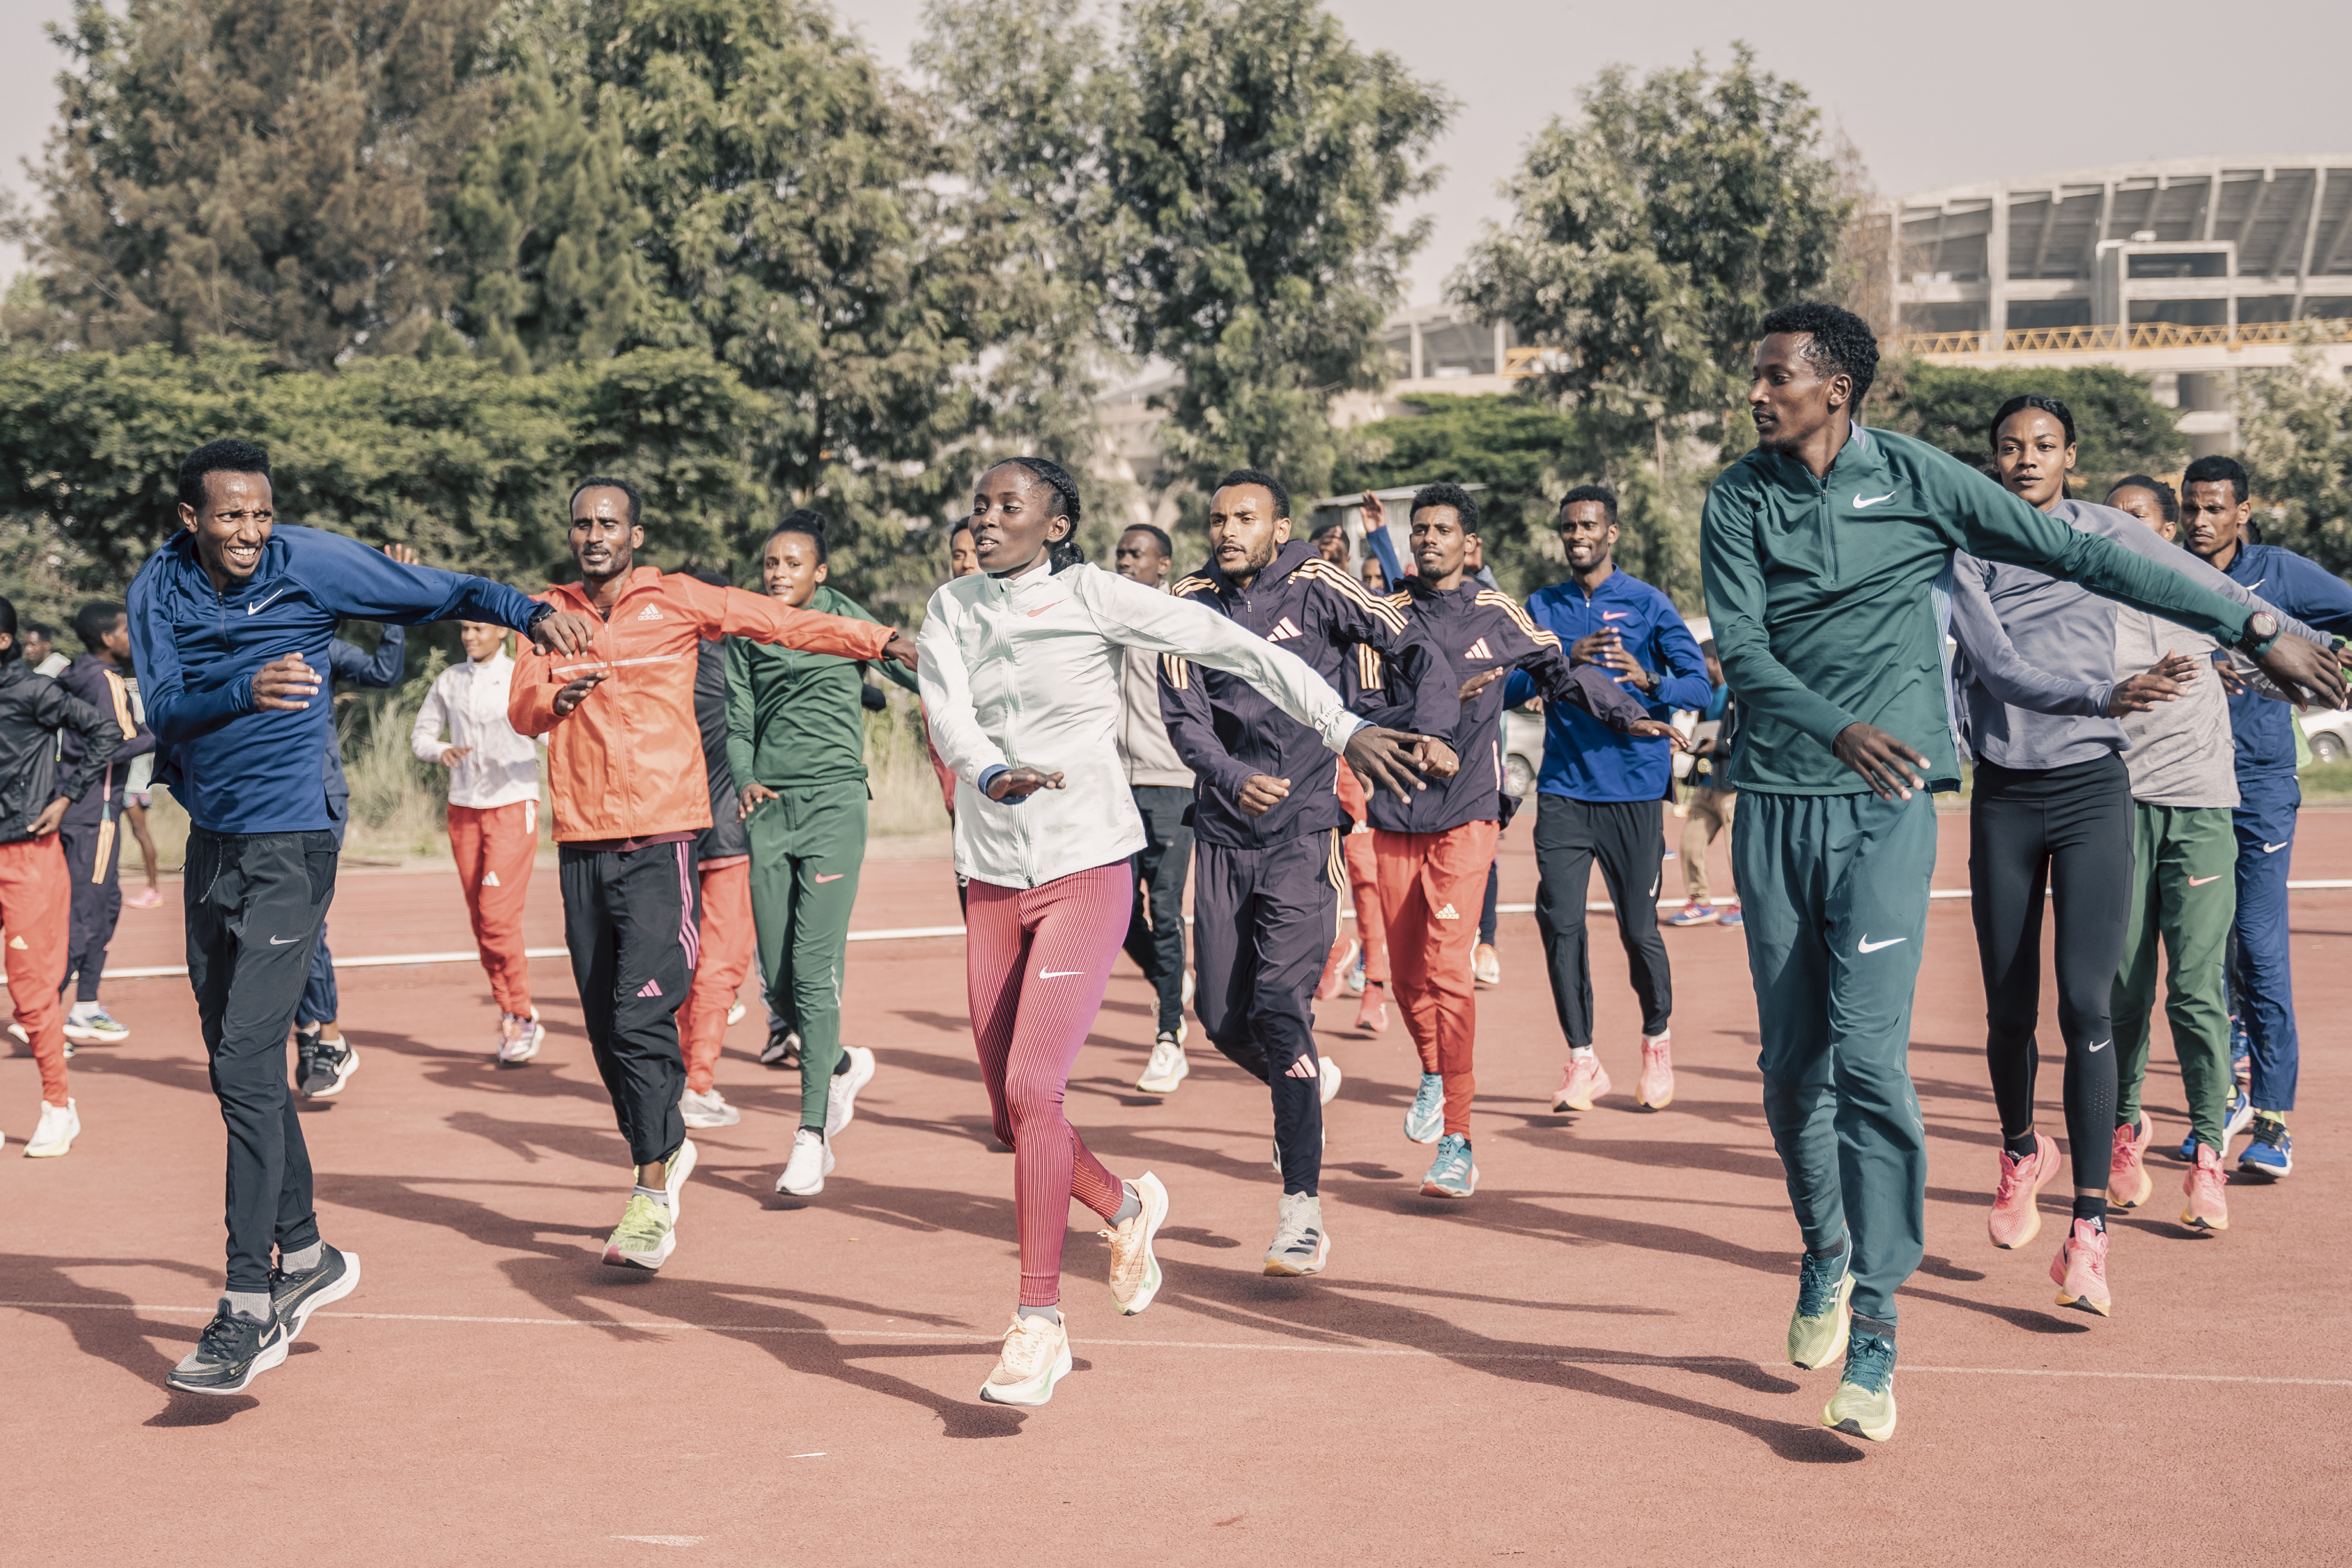 A group of Olympic runners warming up before a run.